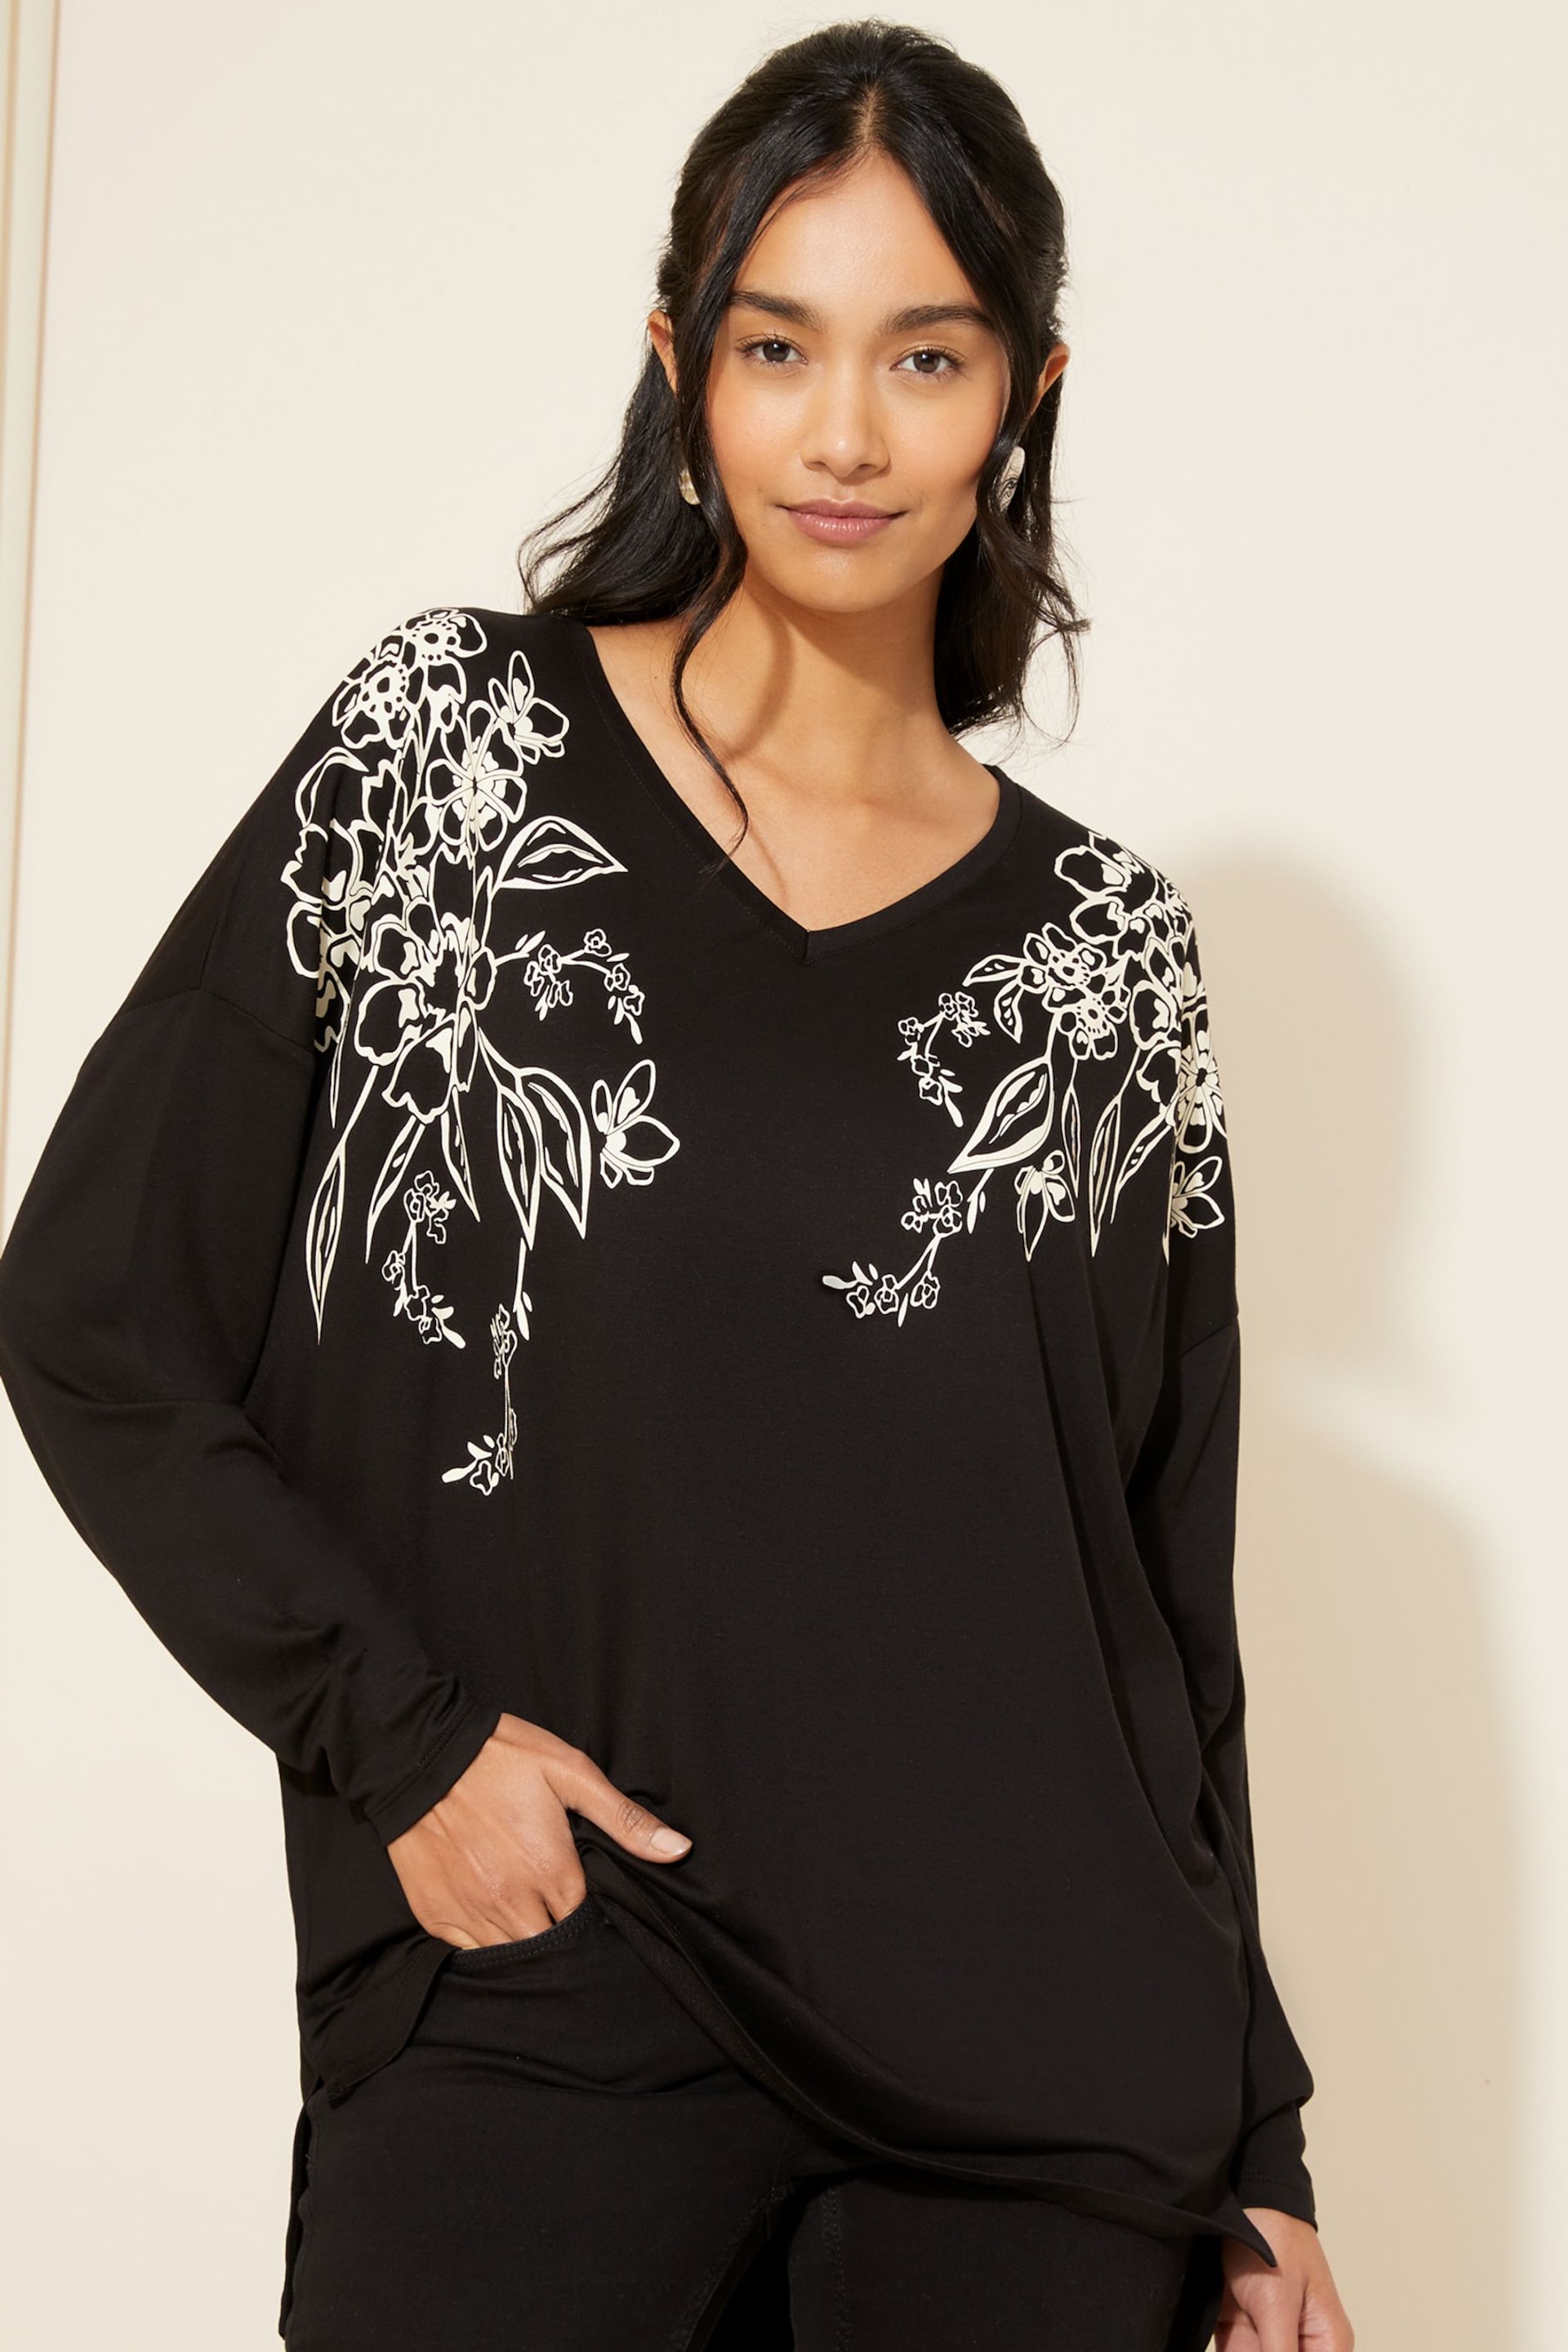 Friends Like These Black Floral Short Sleeve V Neck Tunic Top - Image 1 of 4